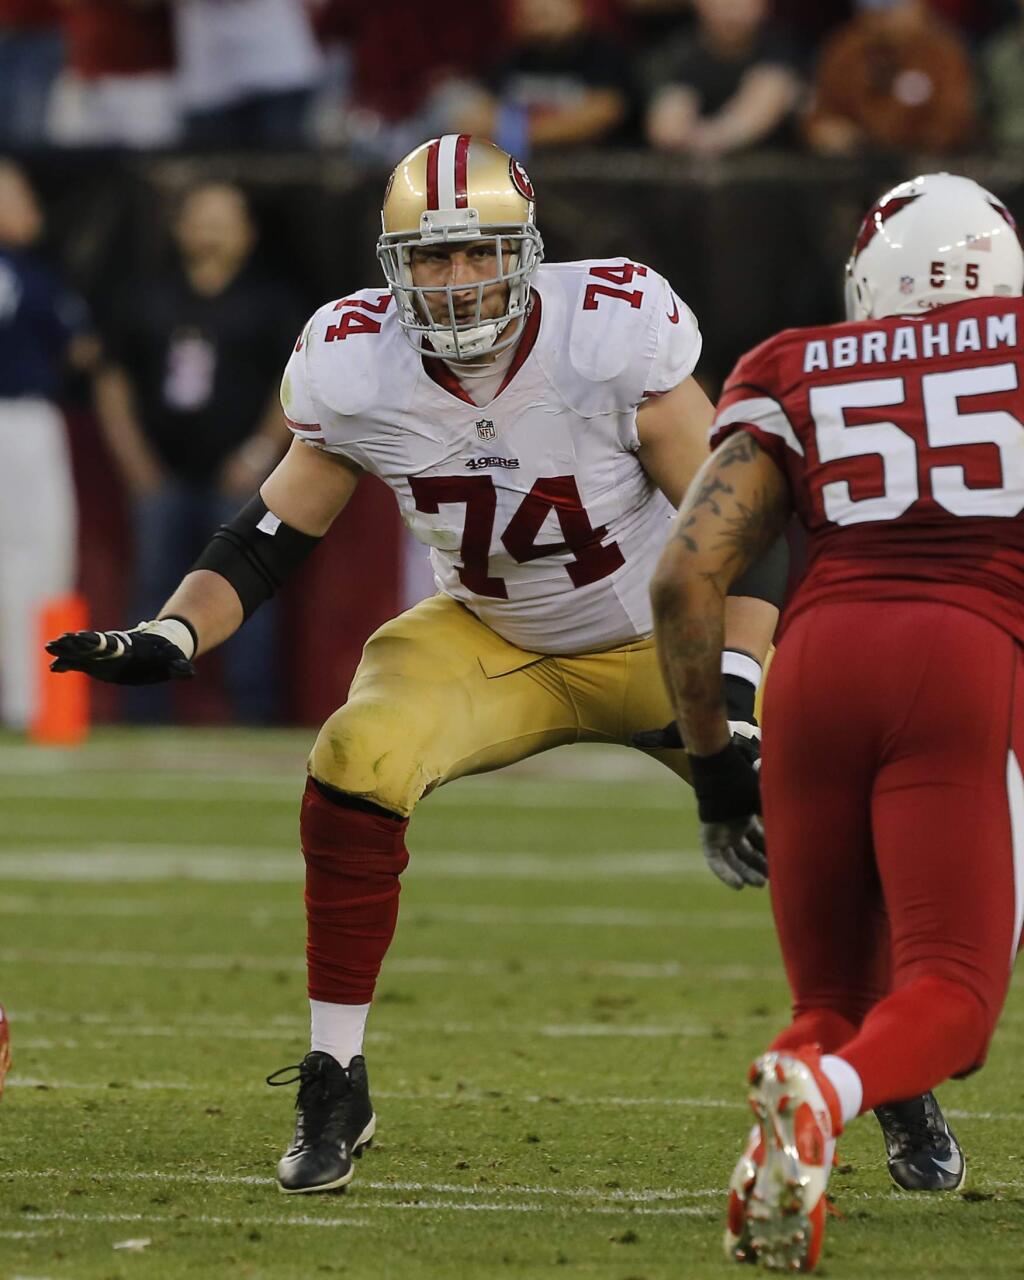 San Francisco 49ers tackle Joe Staley (74) against the Arizona Cardinals during the first half of an NFL football game, Sunday, Dec. 29, 2013, in Glendale, Ariz. (AP Photo/Rick Scuteri)